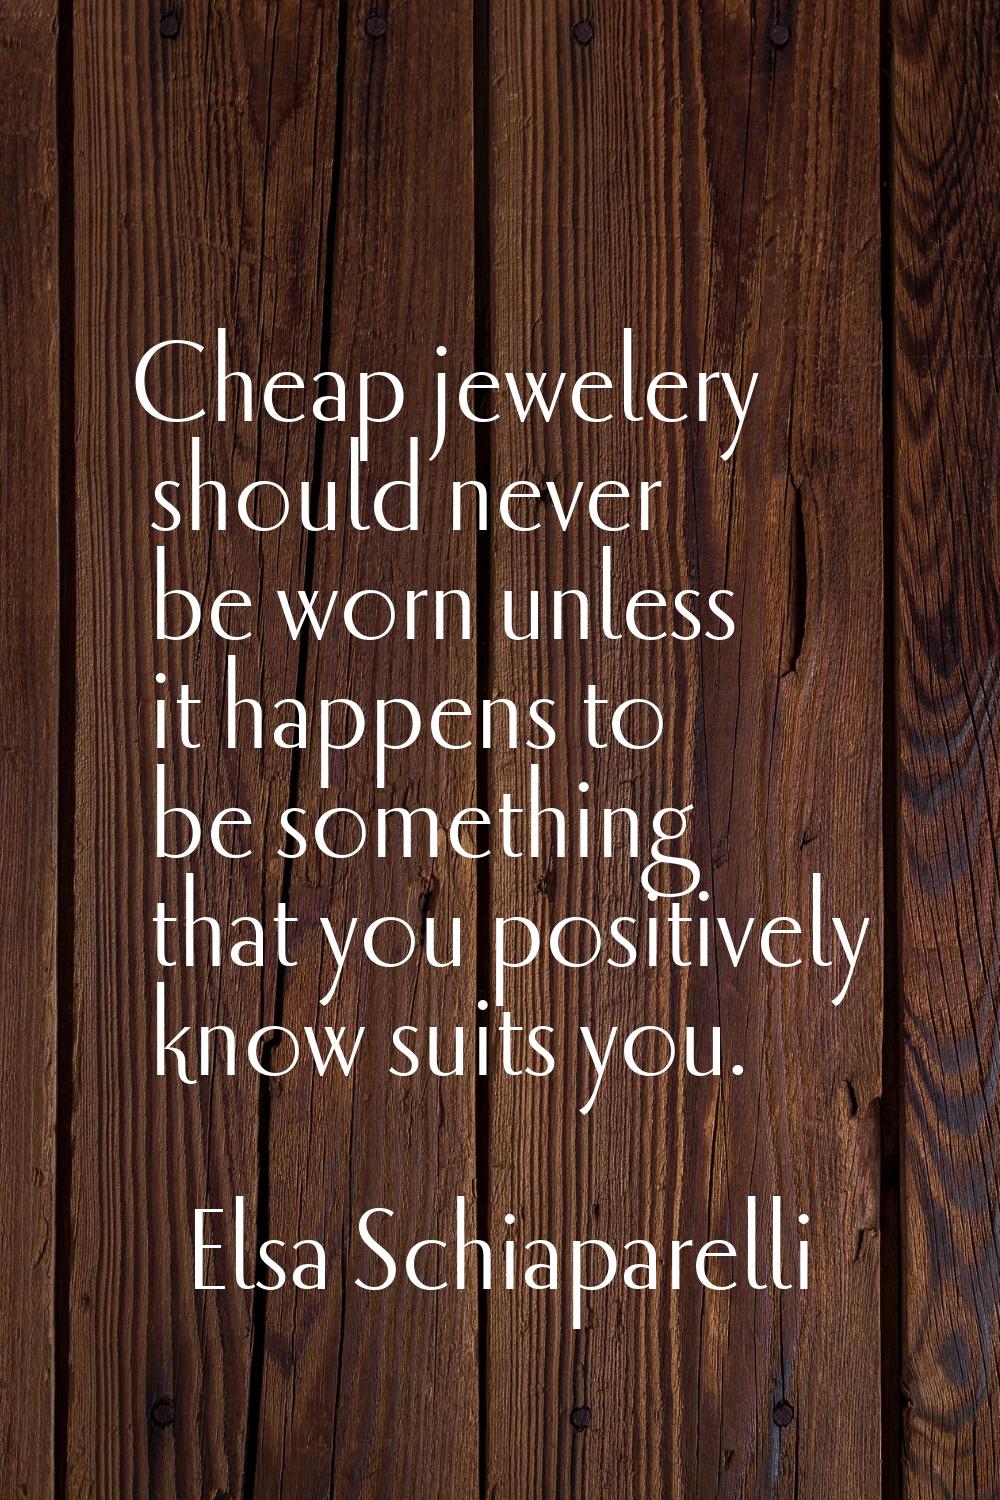 Cheap jewelery should never be worn unless it happens to be something that you positively know suit